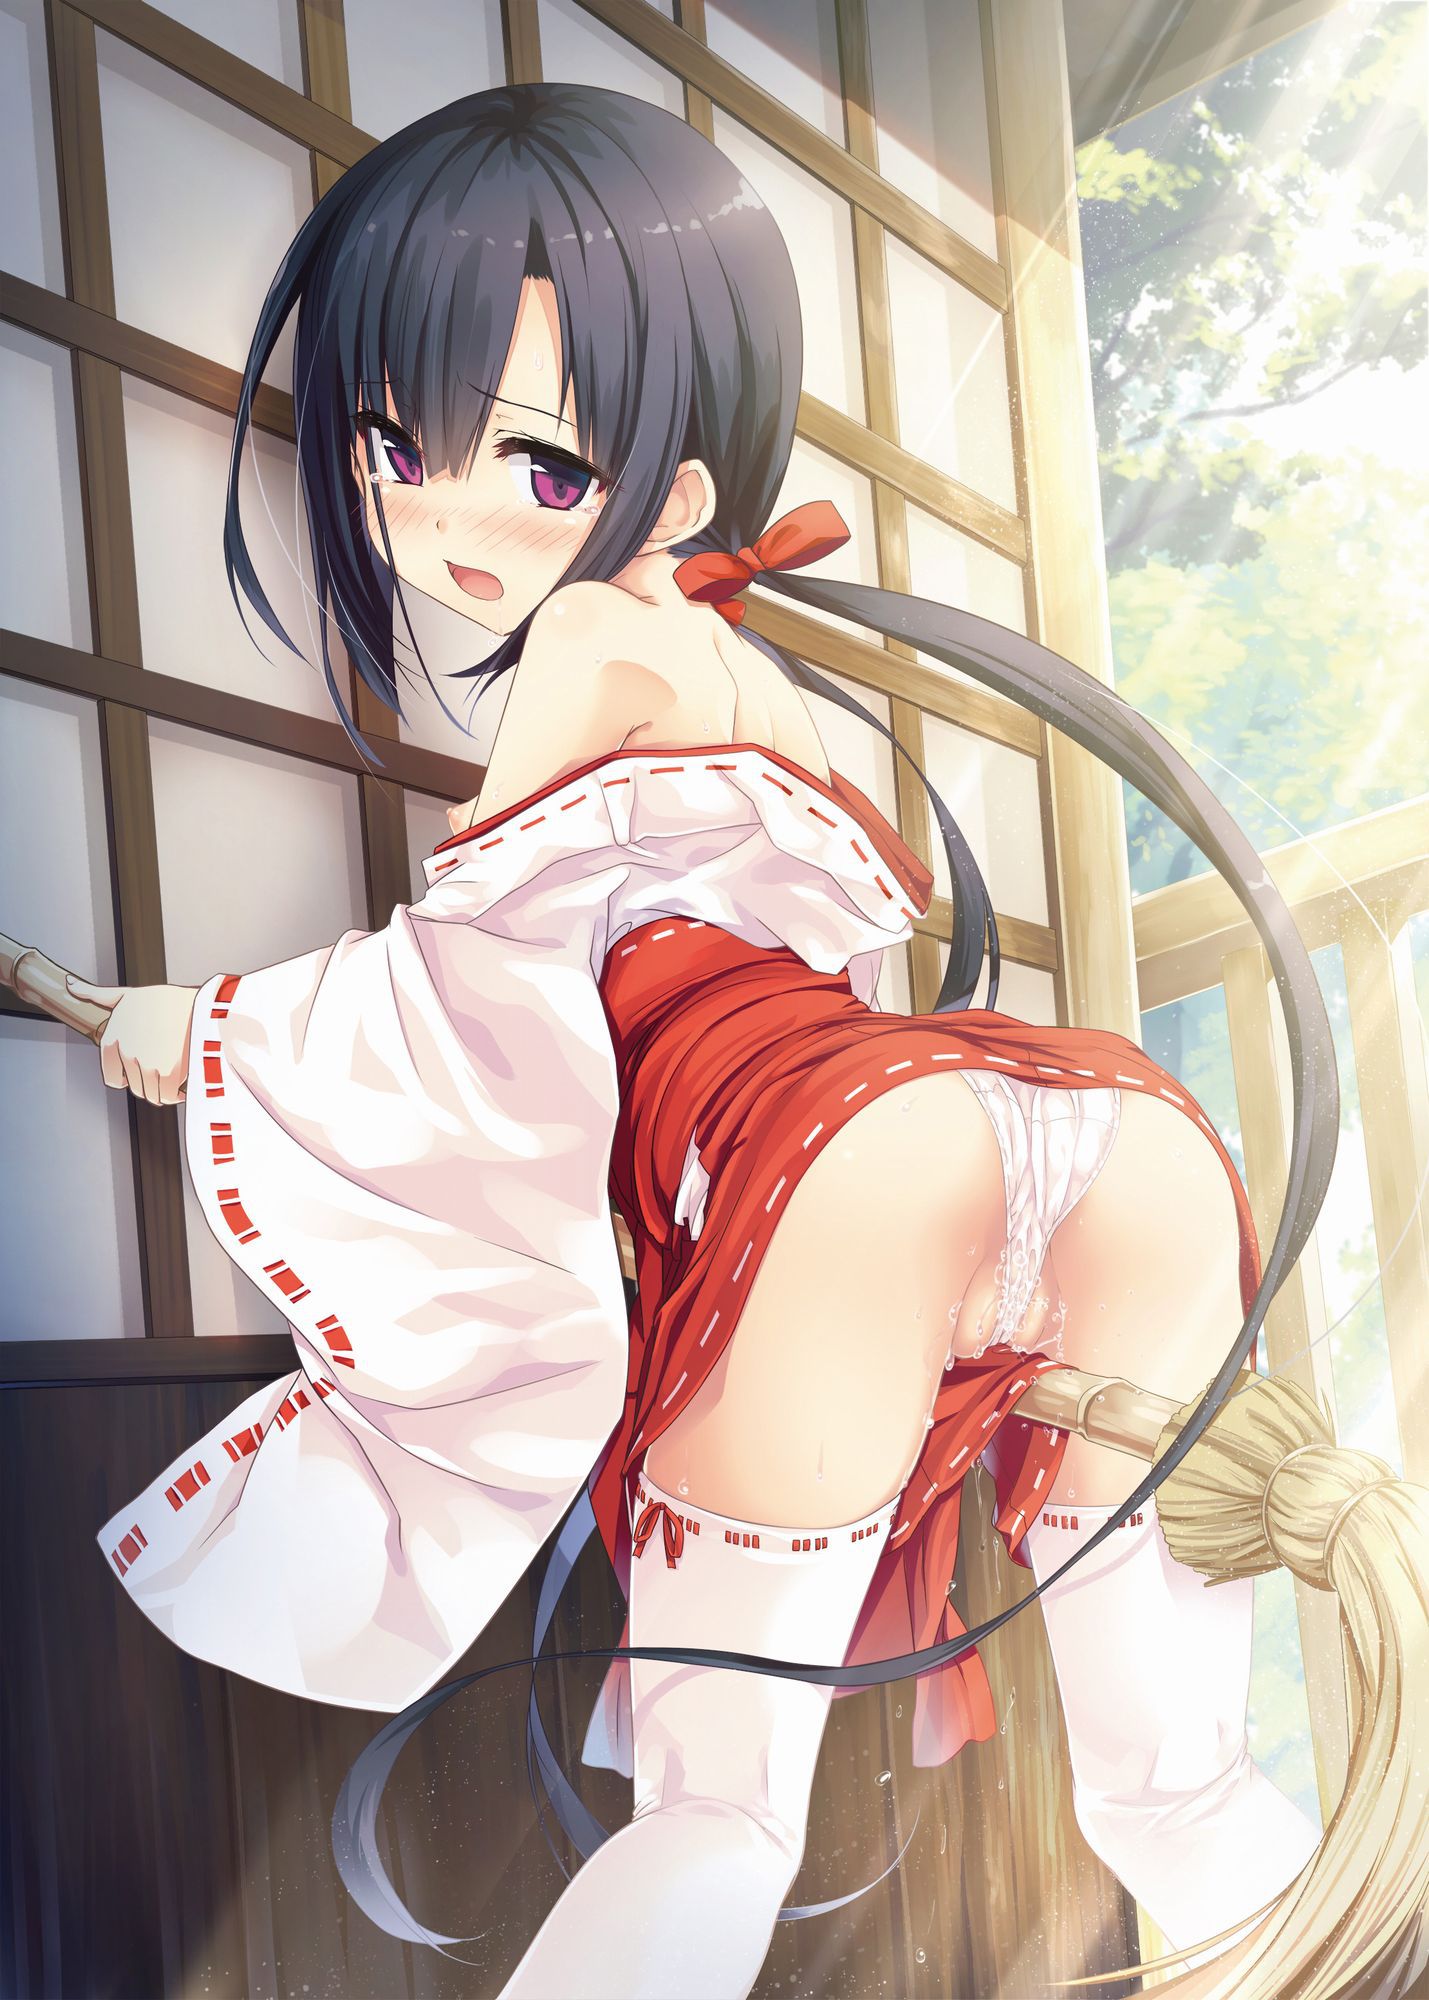 Pants will get dirty! Two-dimensional erotic image of a loli girl masturbating by playing with a as it is 34